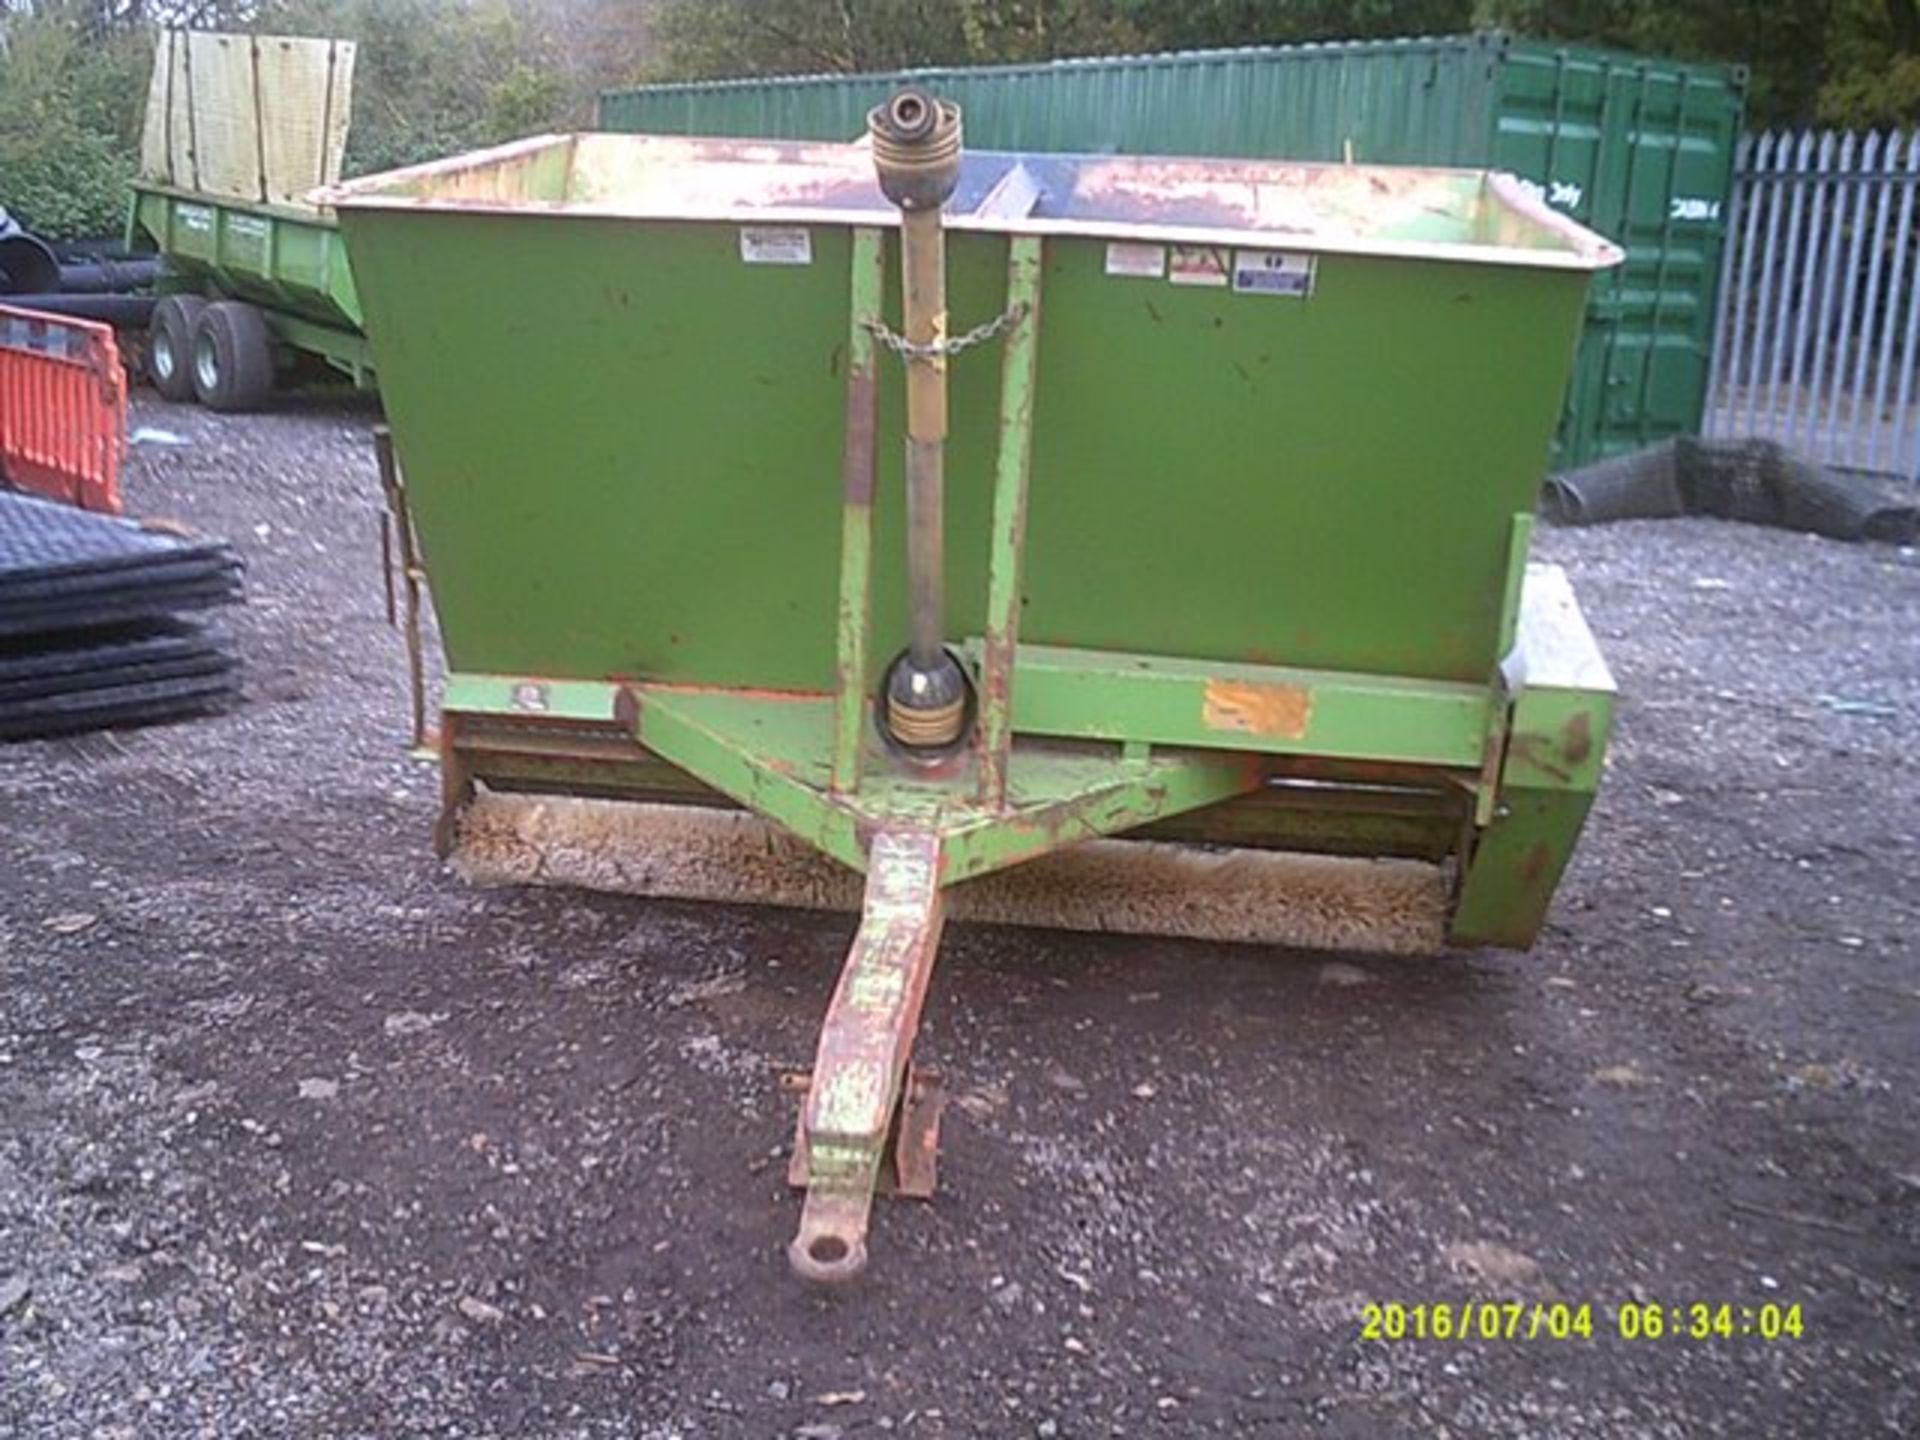 Ultraplant 4 ton sand spreader, Serial no. 3966190, 2m approx. - Image 4 of 5